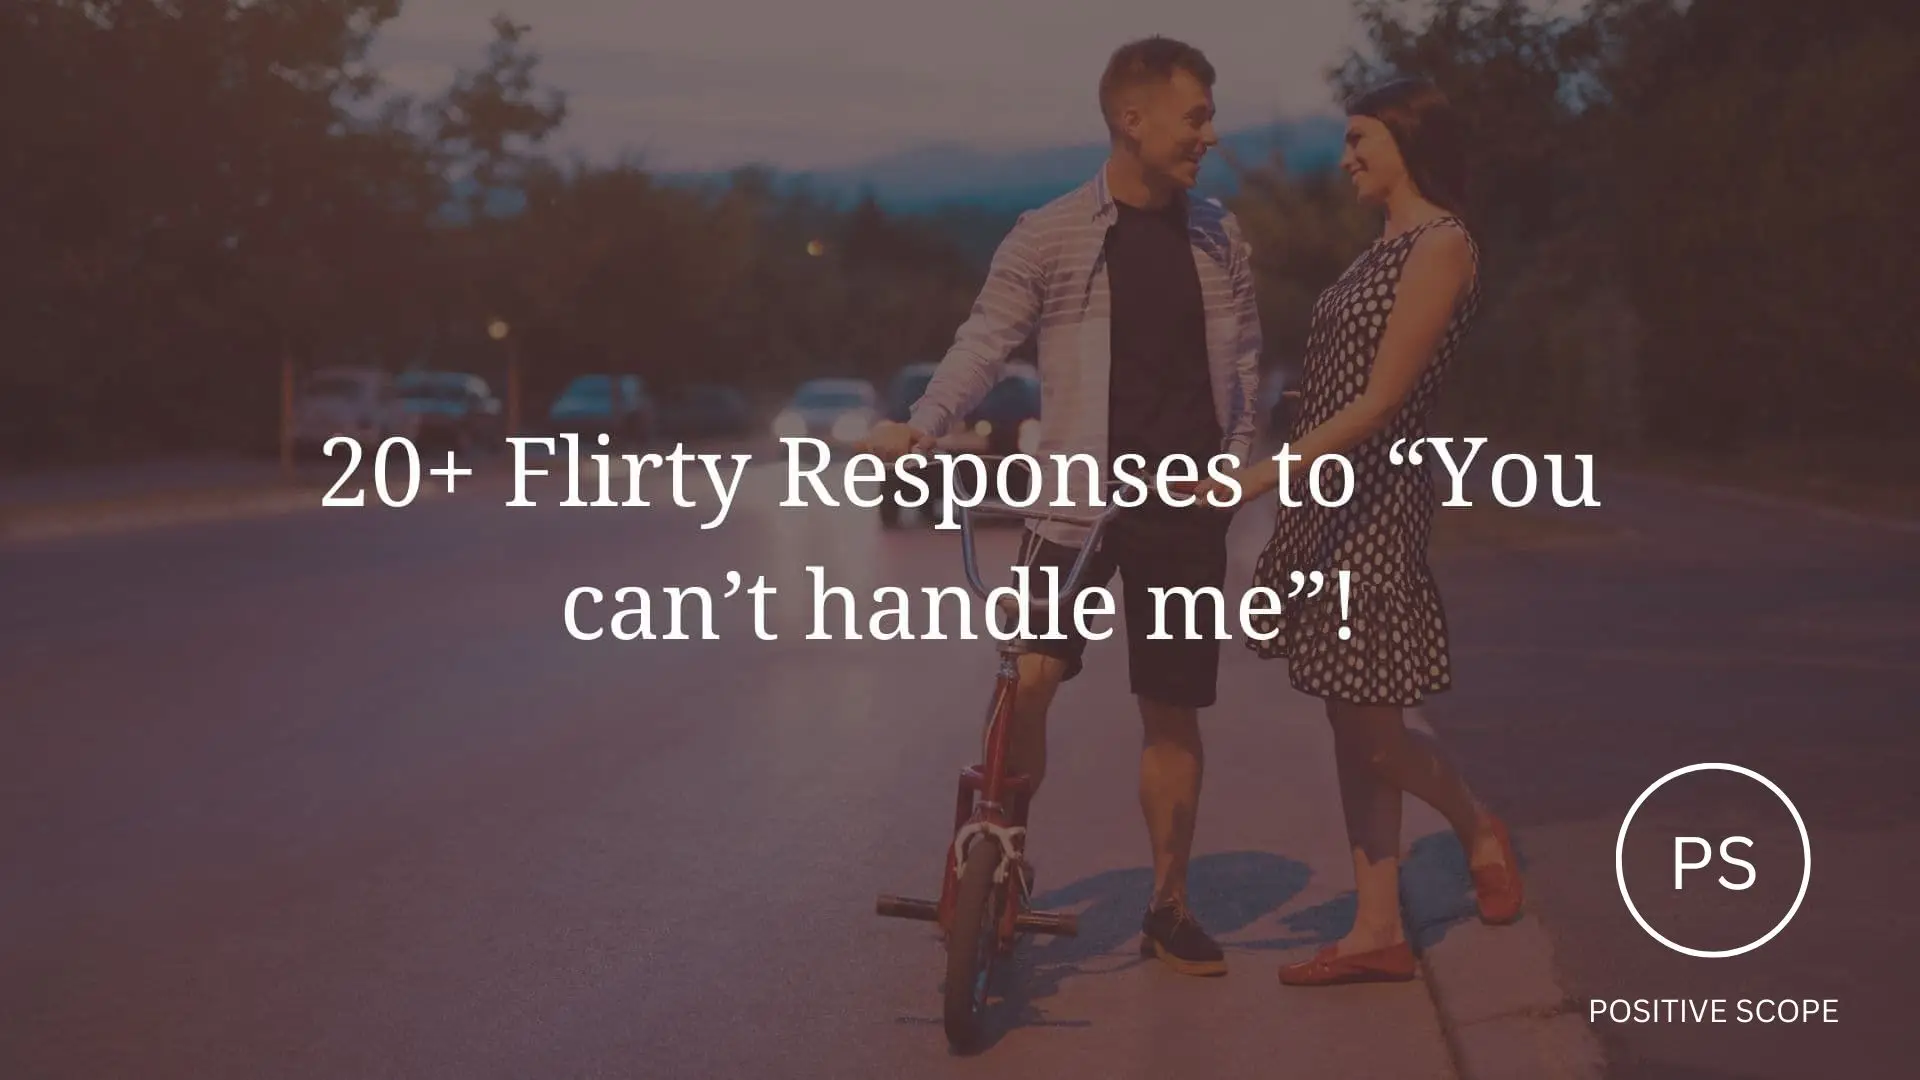 20+ Flirty Responses to You can’t handle me!